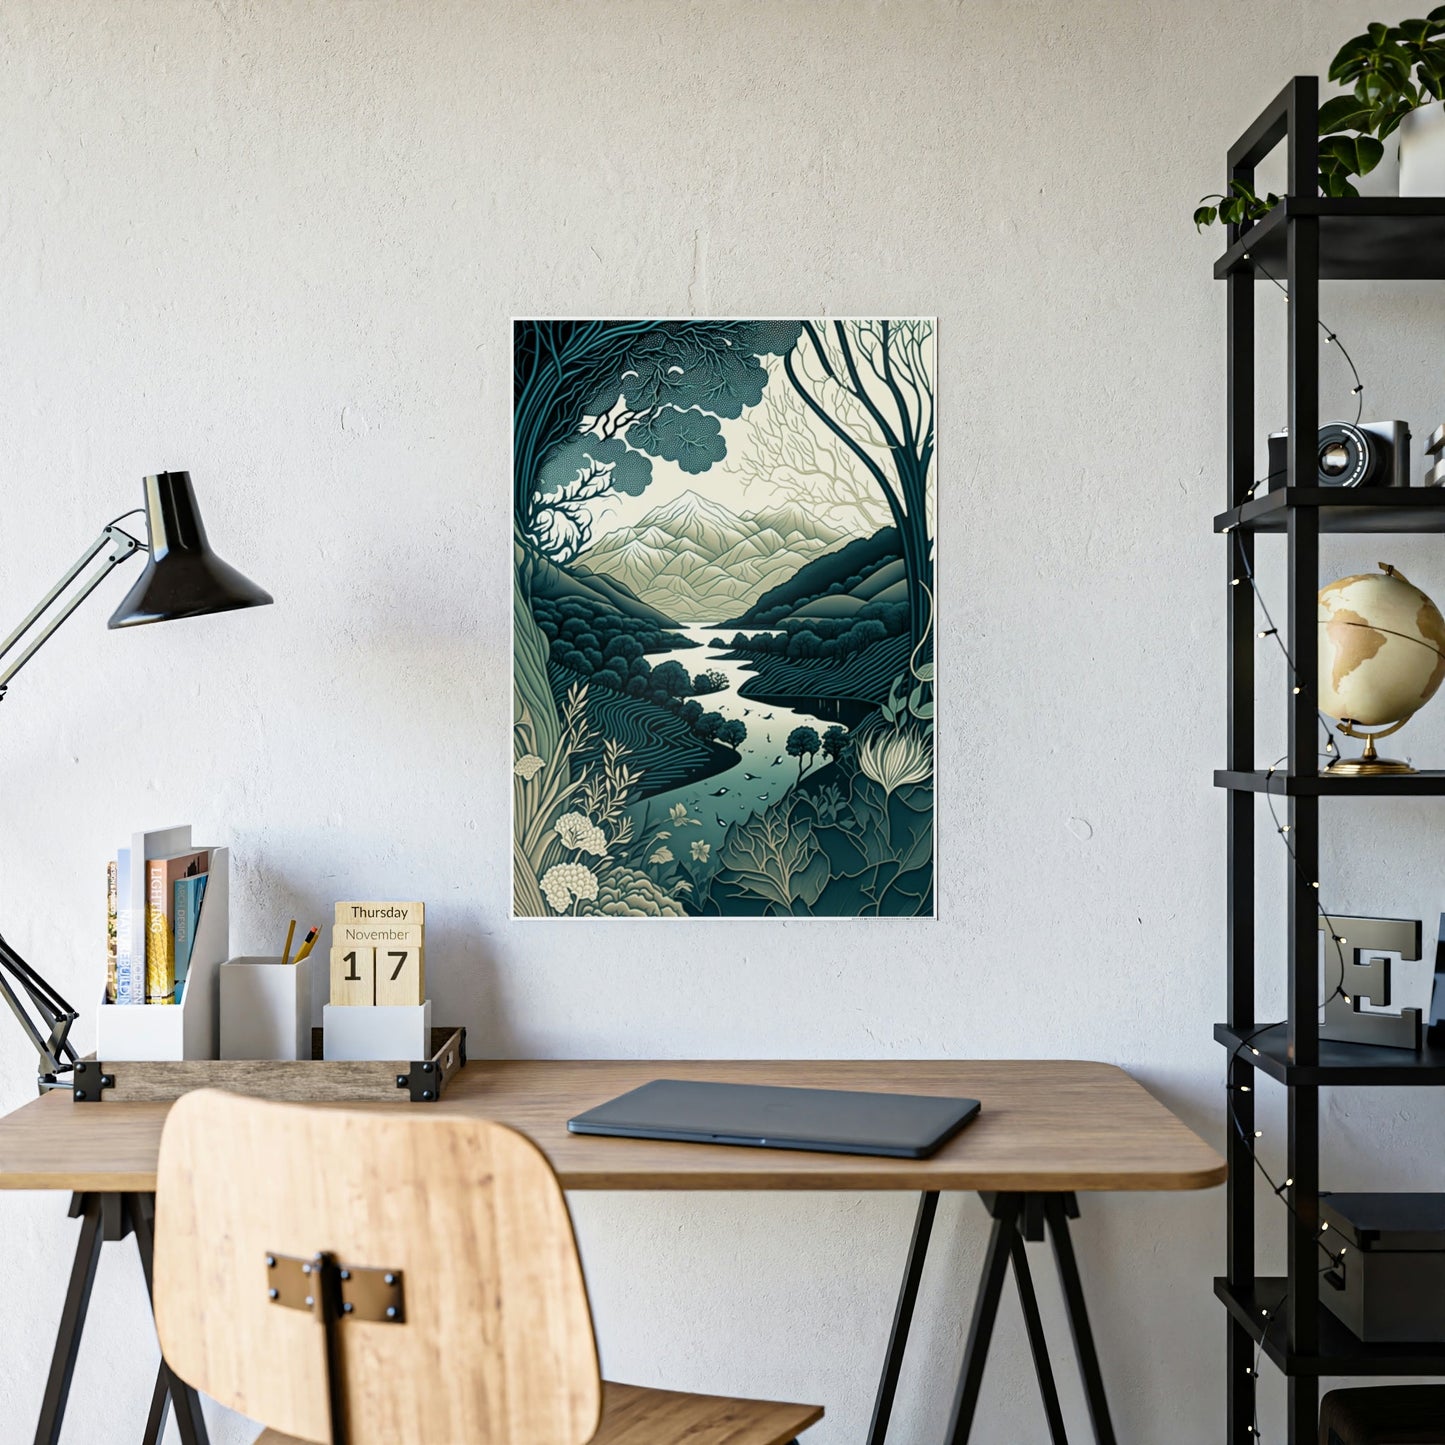 Fluid Lines: A Framed Canvas & Poster Artwork of an Abstract Flowing Design